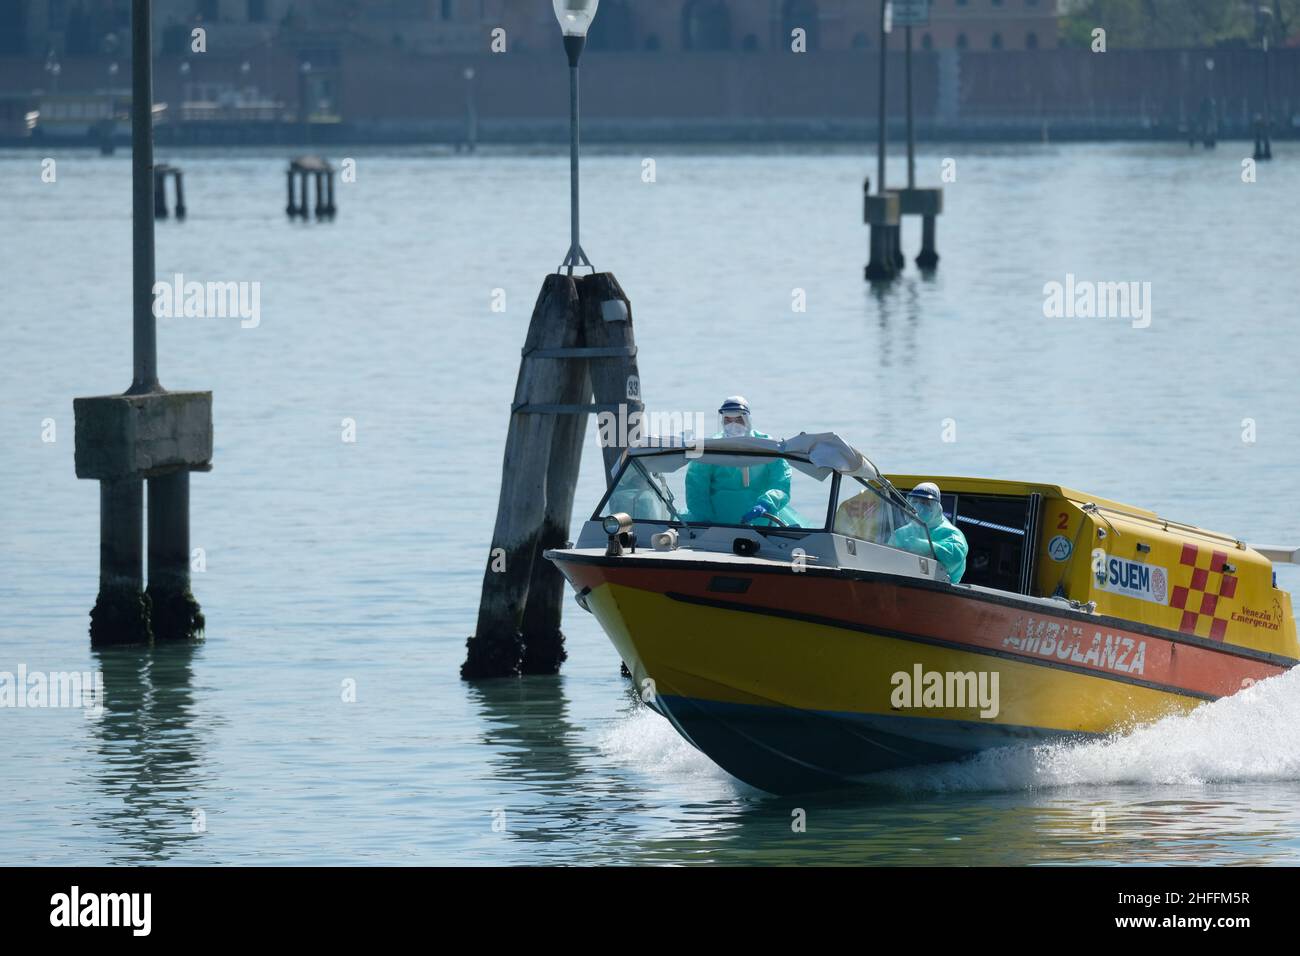 Health workers arrive by boat ambulance at a Venice hospital. Venice, Italy, April 10, 2020. (MvS) Stock Photo